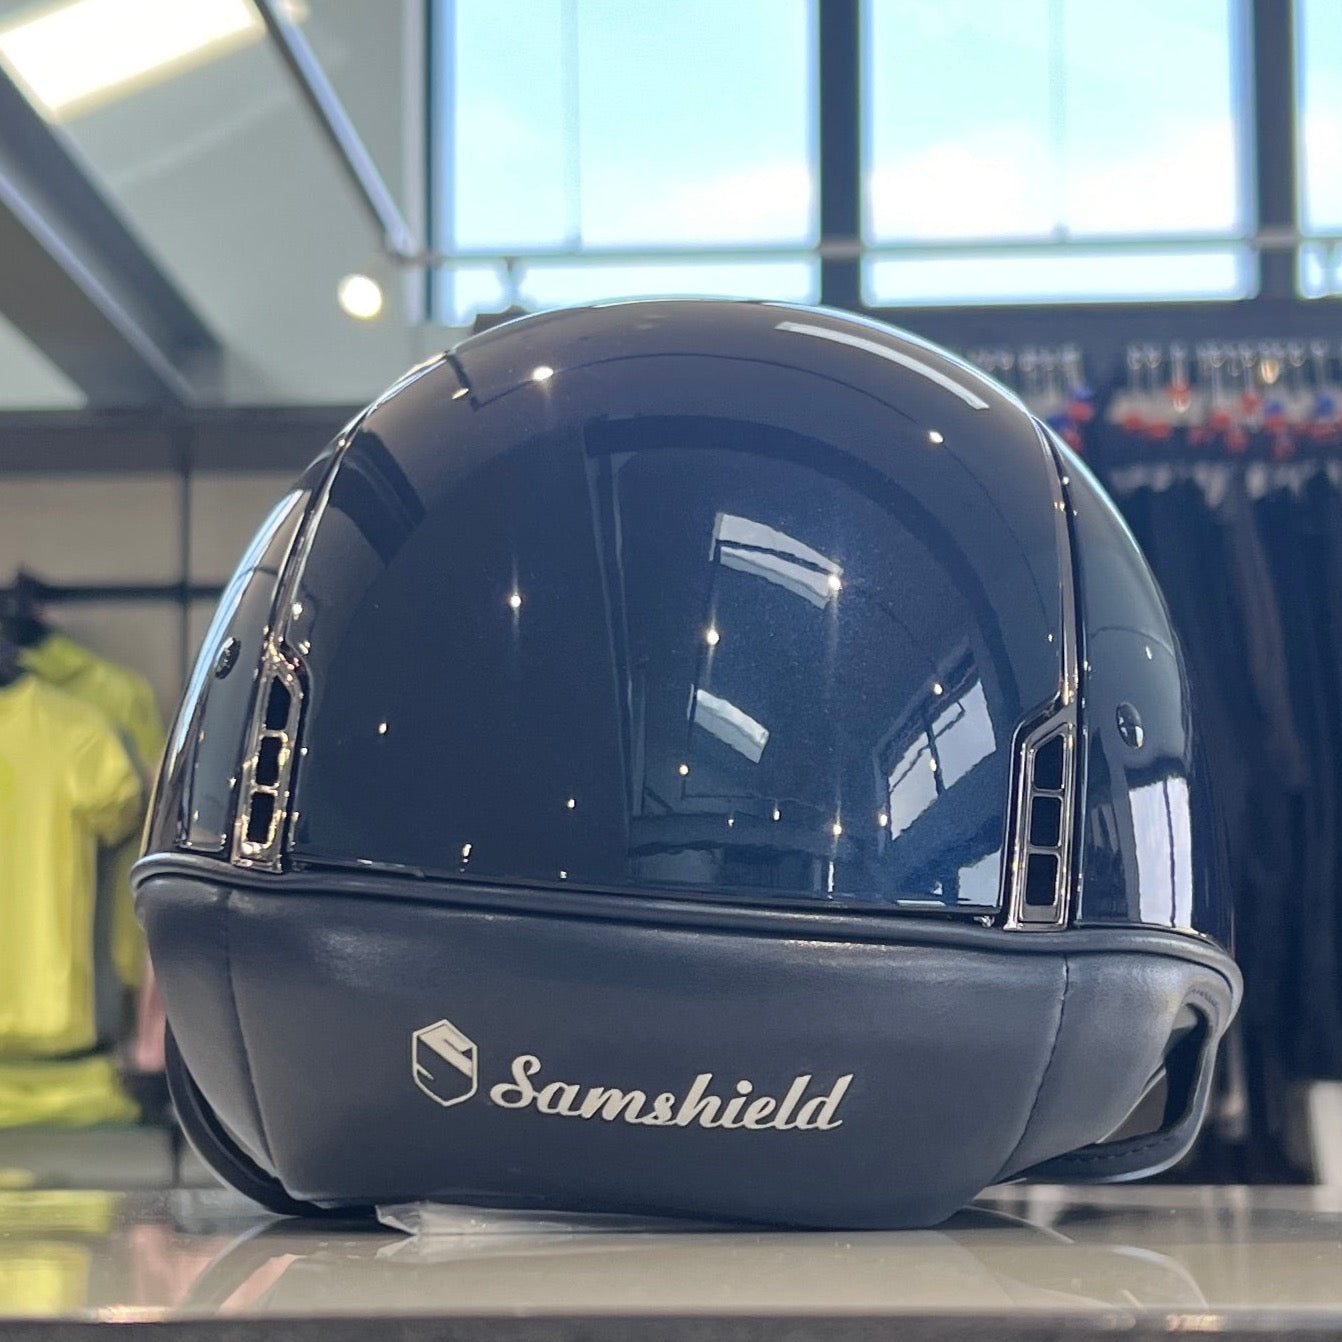 Samshield 1.0 Blue glossy S- in stock and ready to ship!